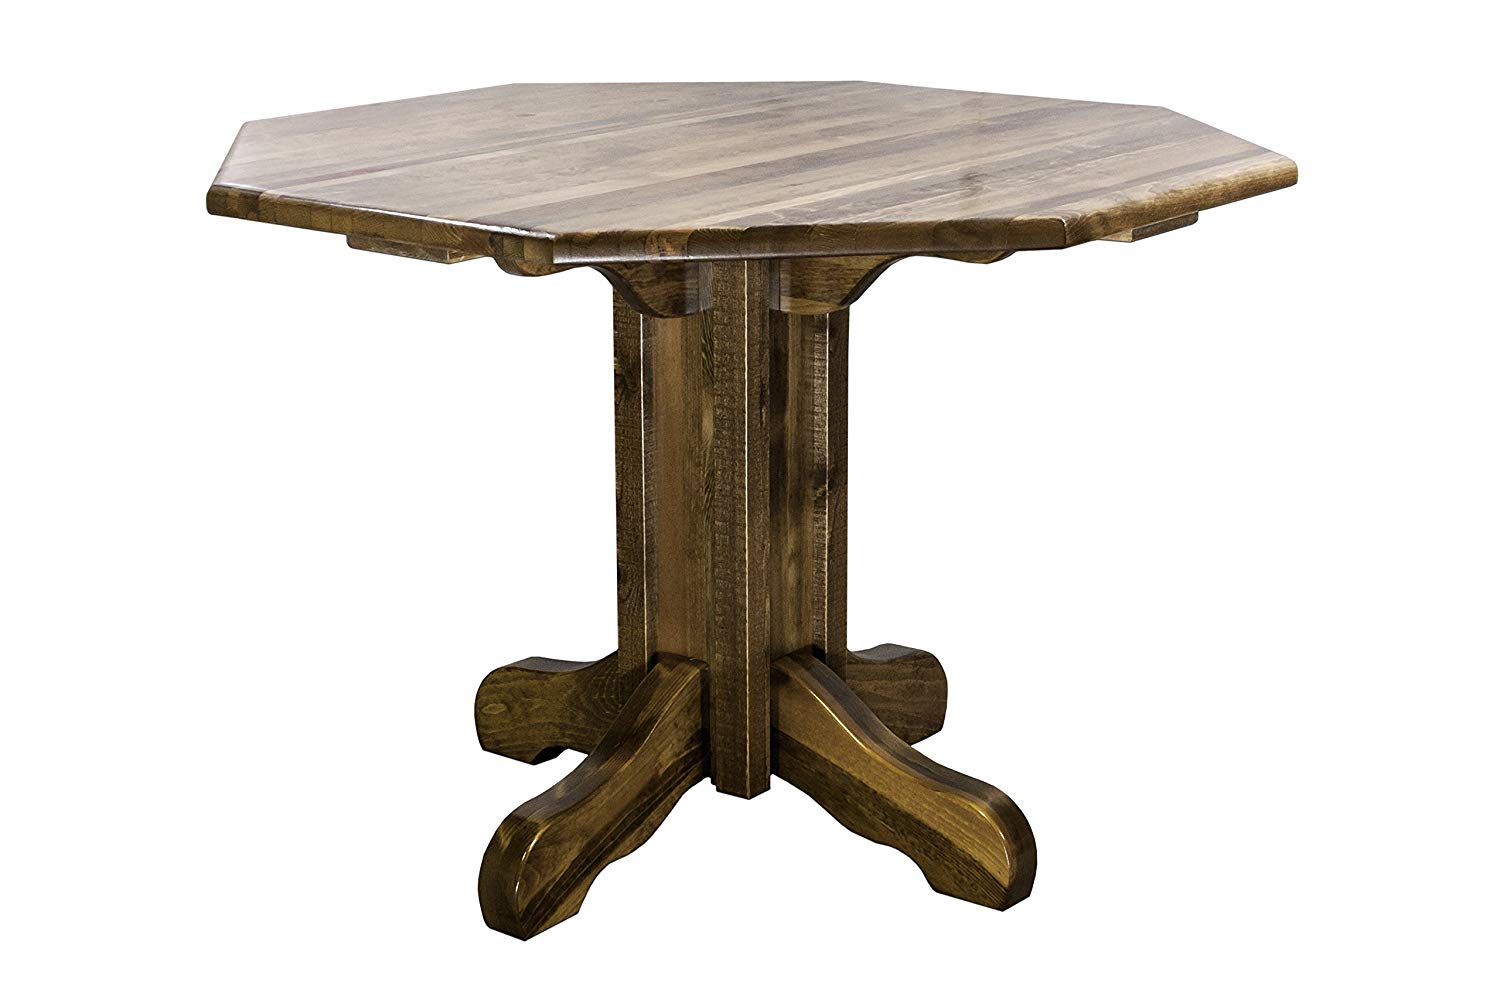 woodworks homestead collection center pedestal otrpl bengal manor mango wood twist accent table with octagonal top stain and lacquer finish kitchen dining triangle end bedroom